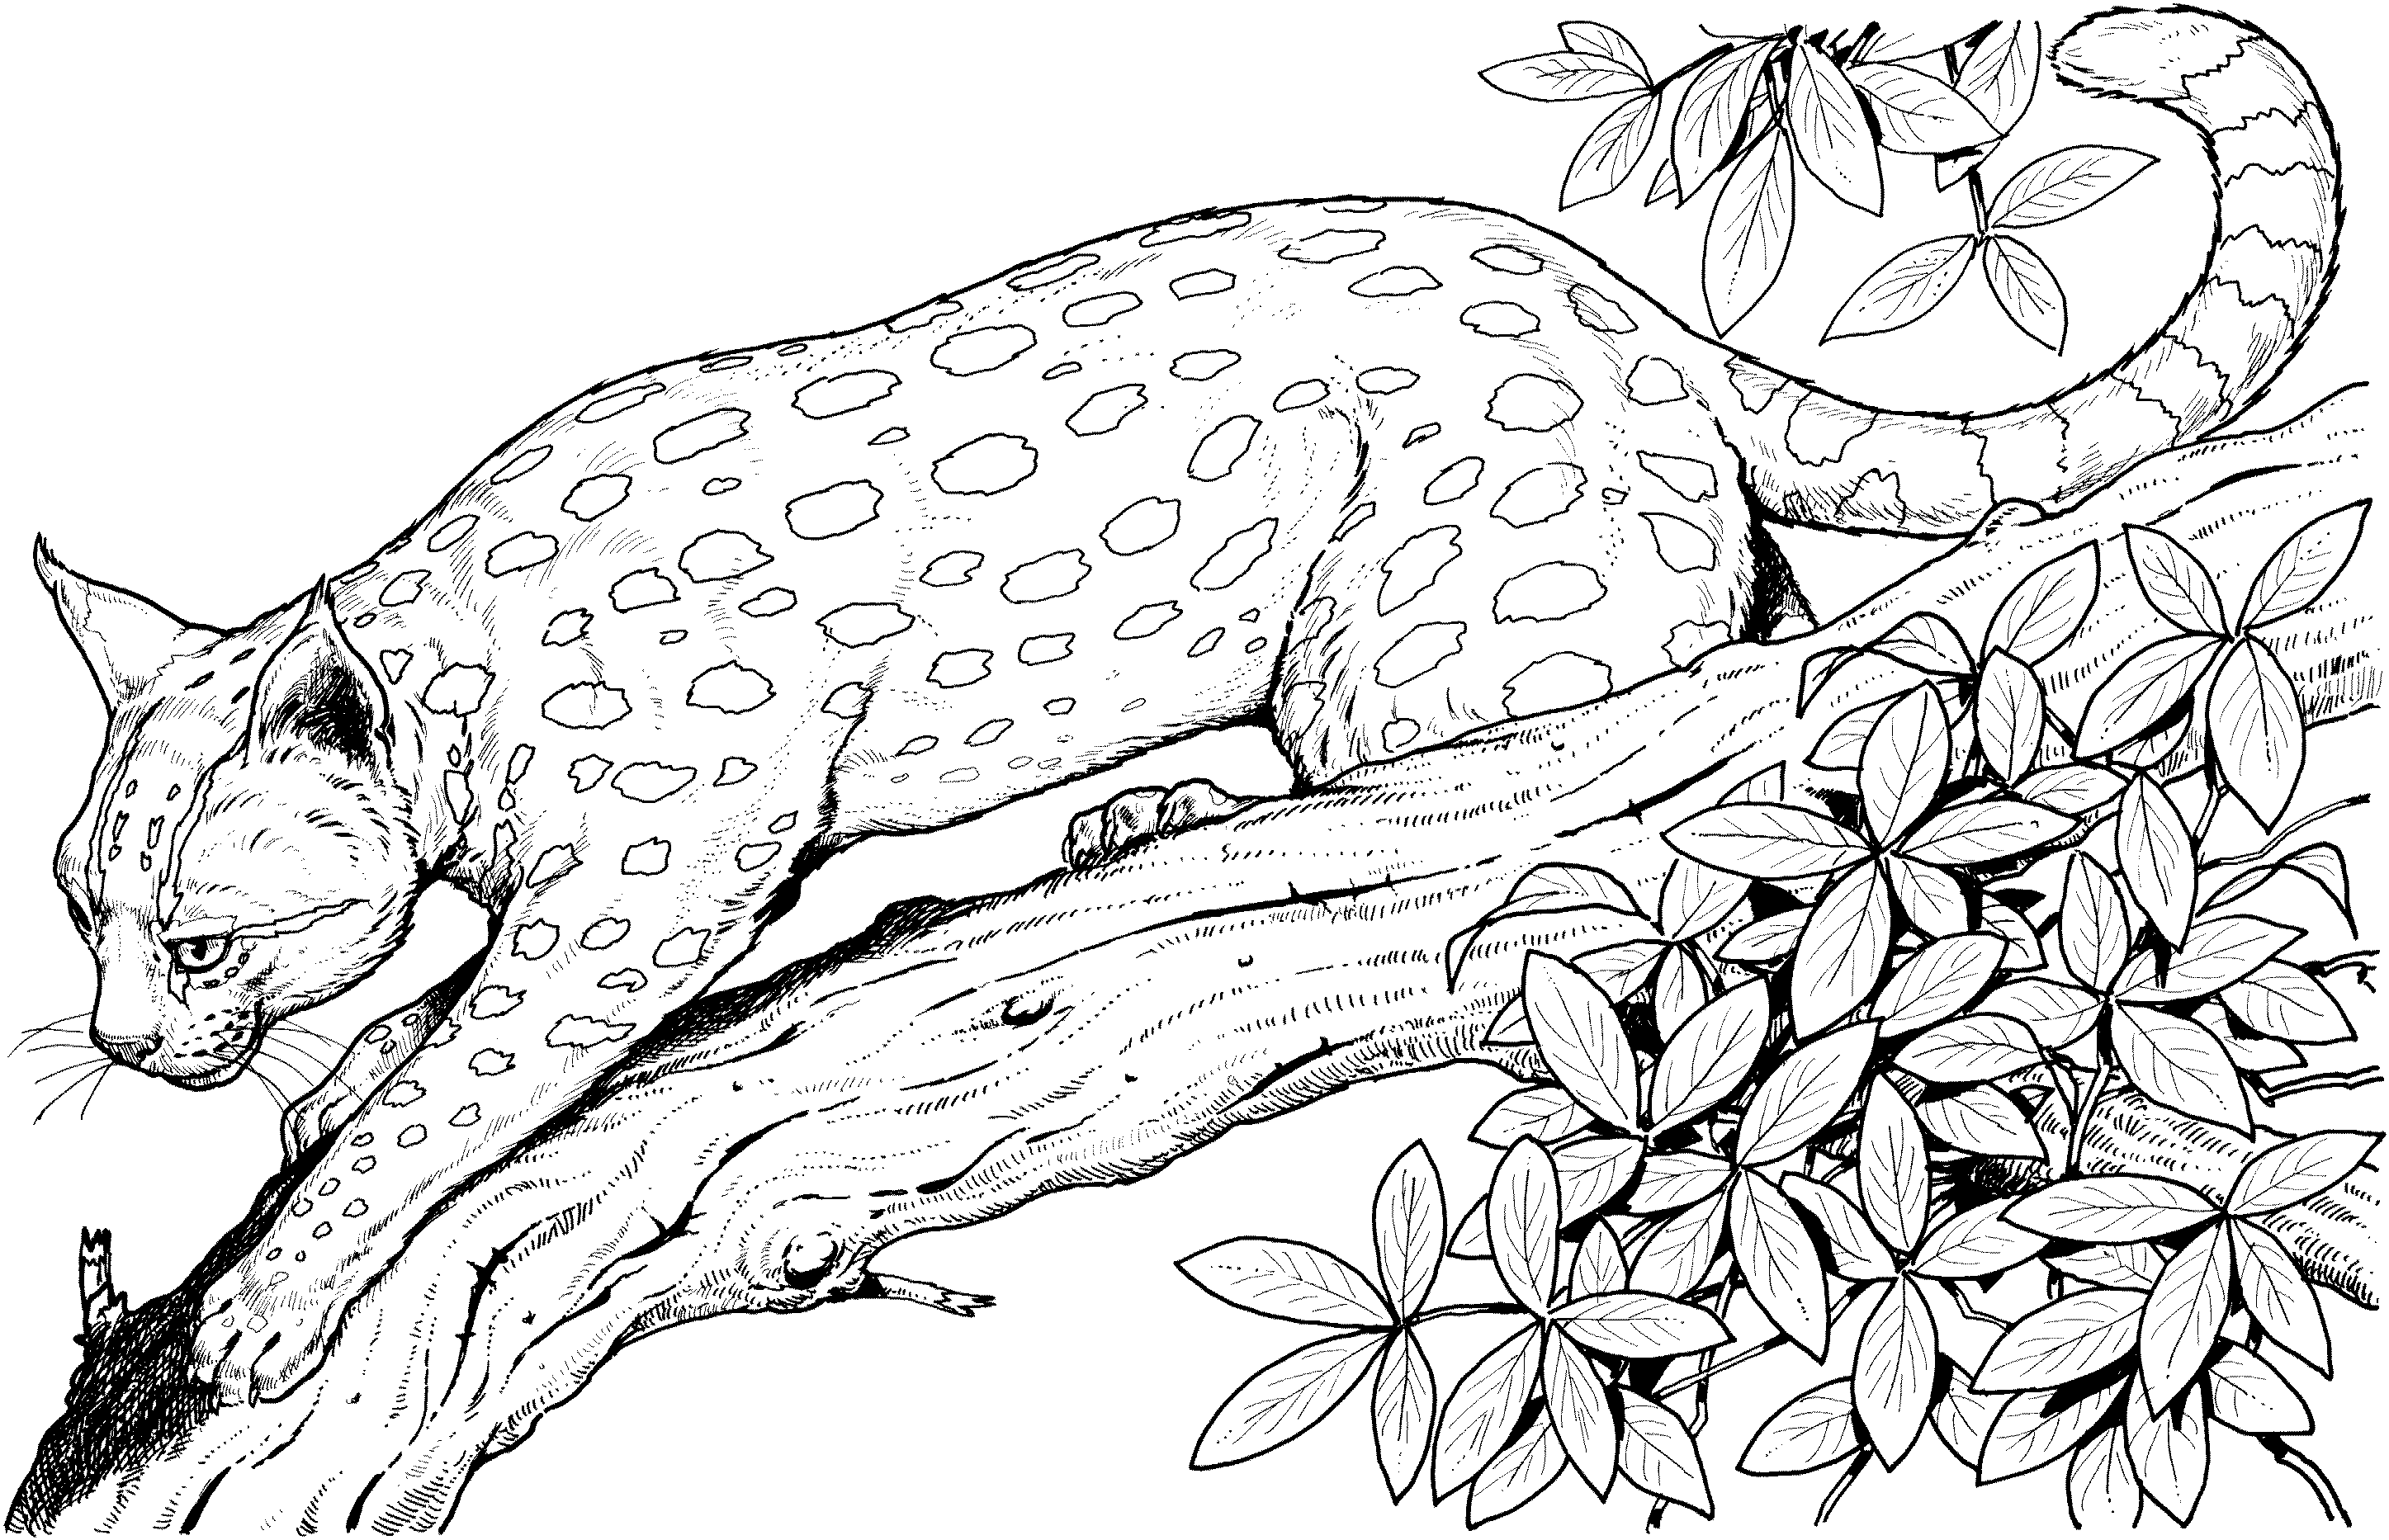 Coloring page - Big the Cat